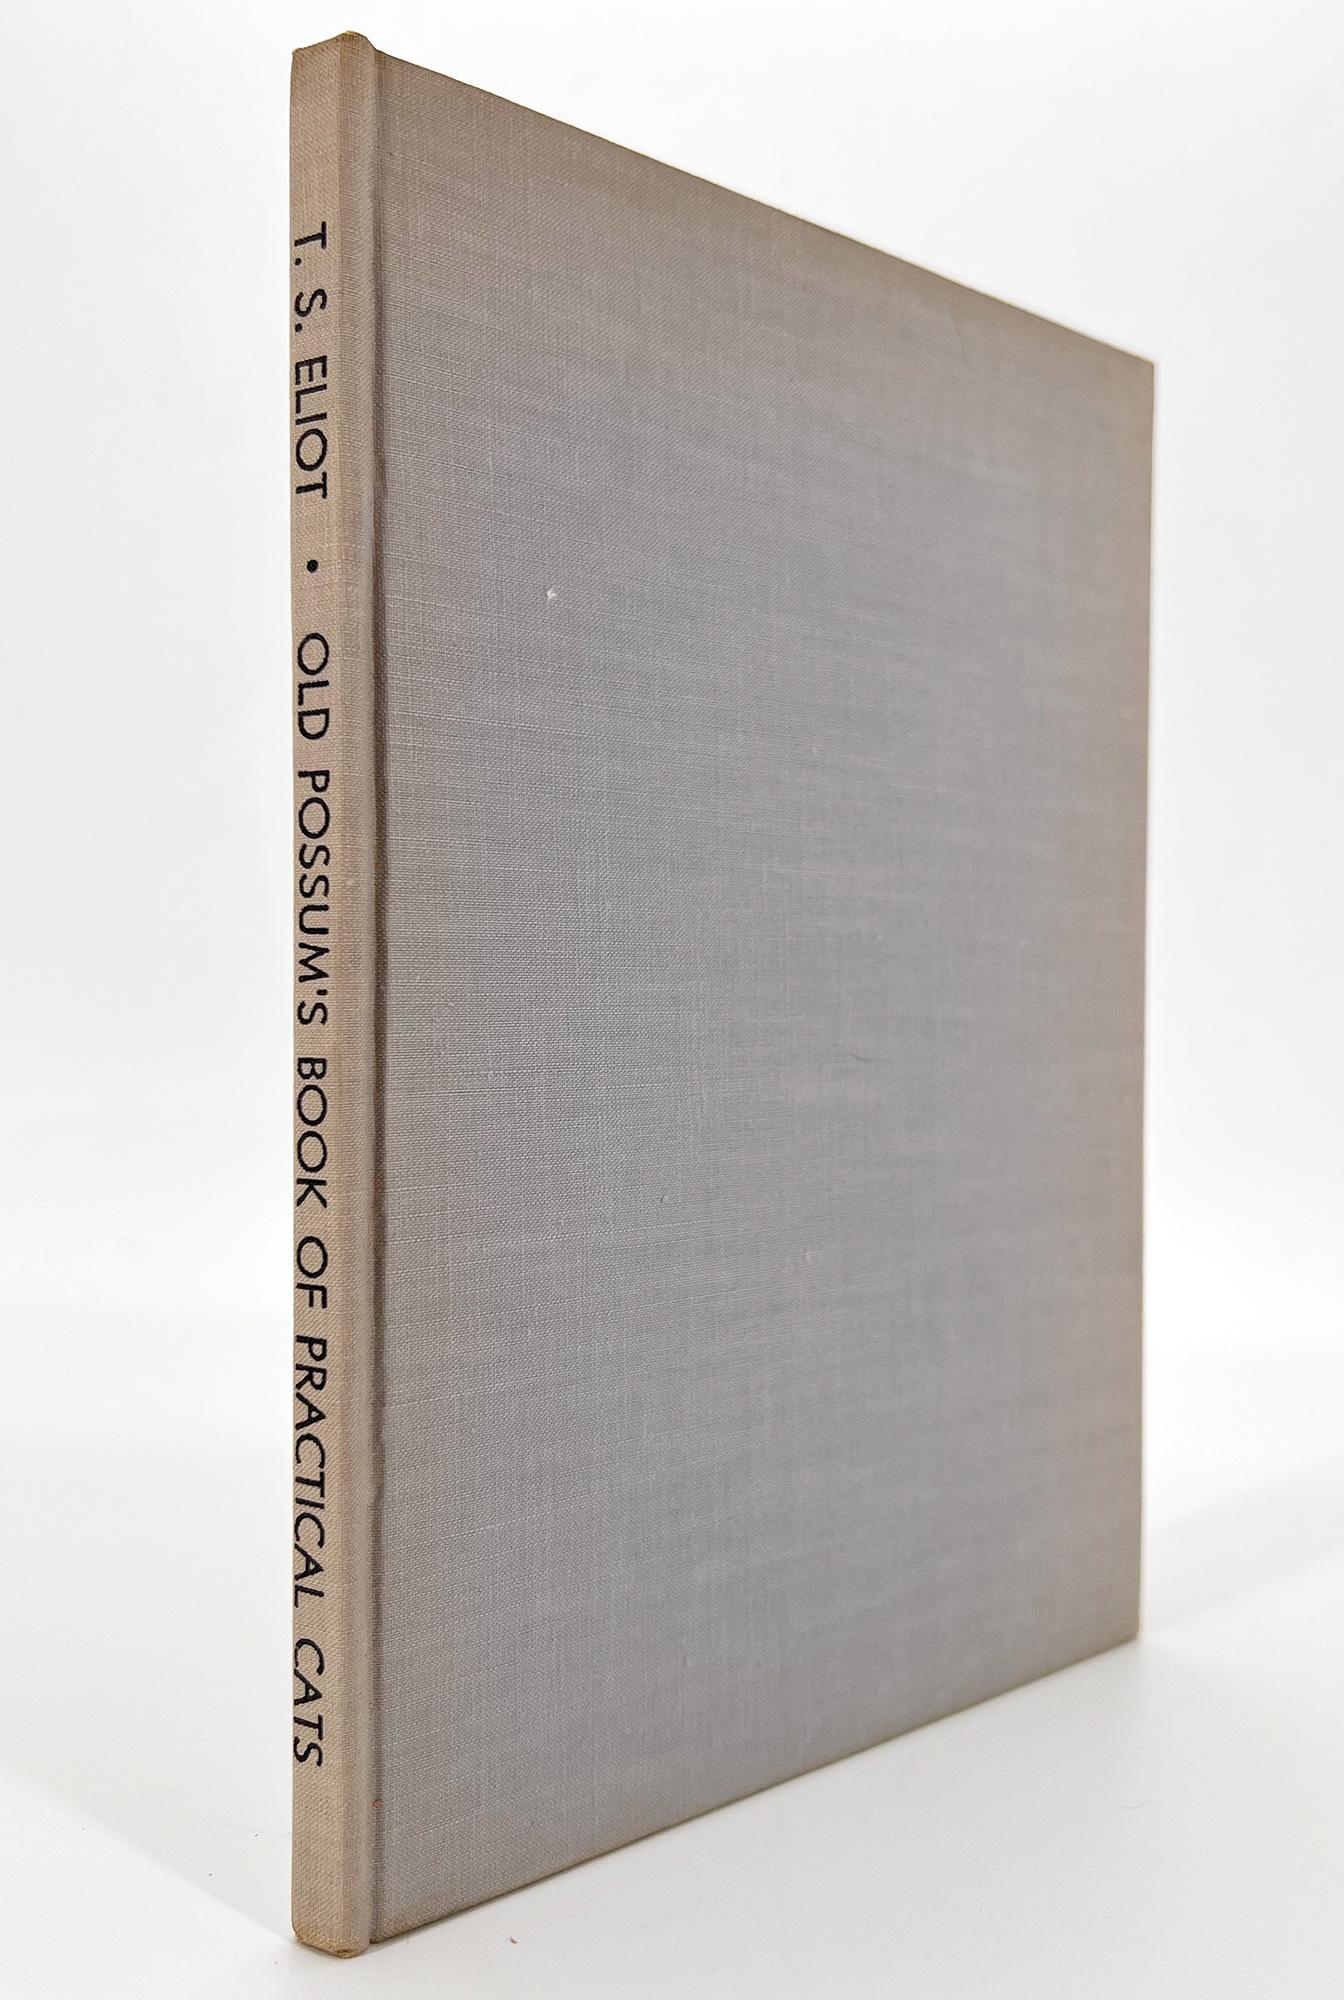 American Old Possum's Book of Practical Cats by T. S. Eliot For Sale